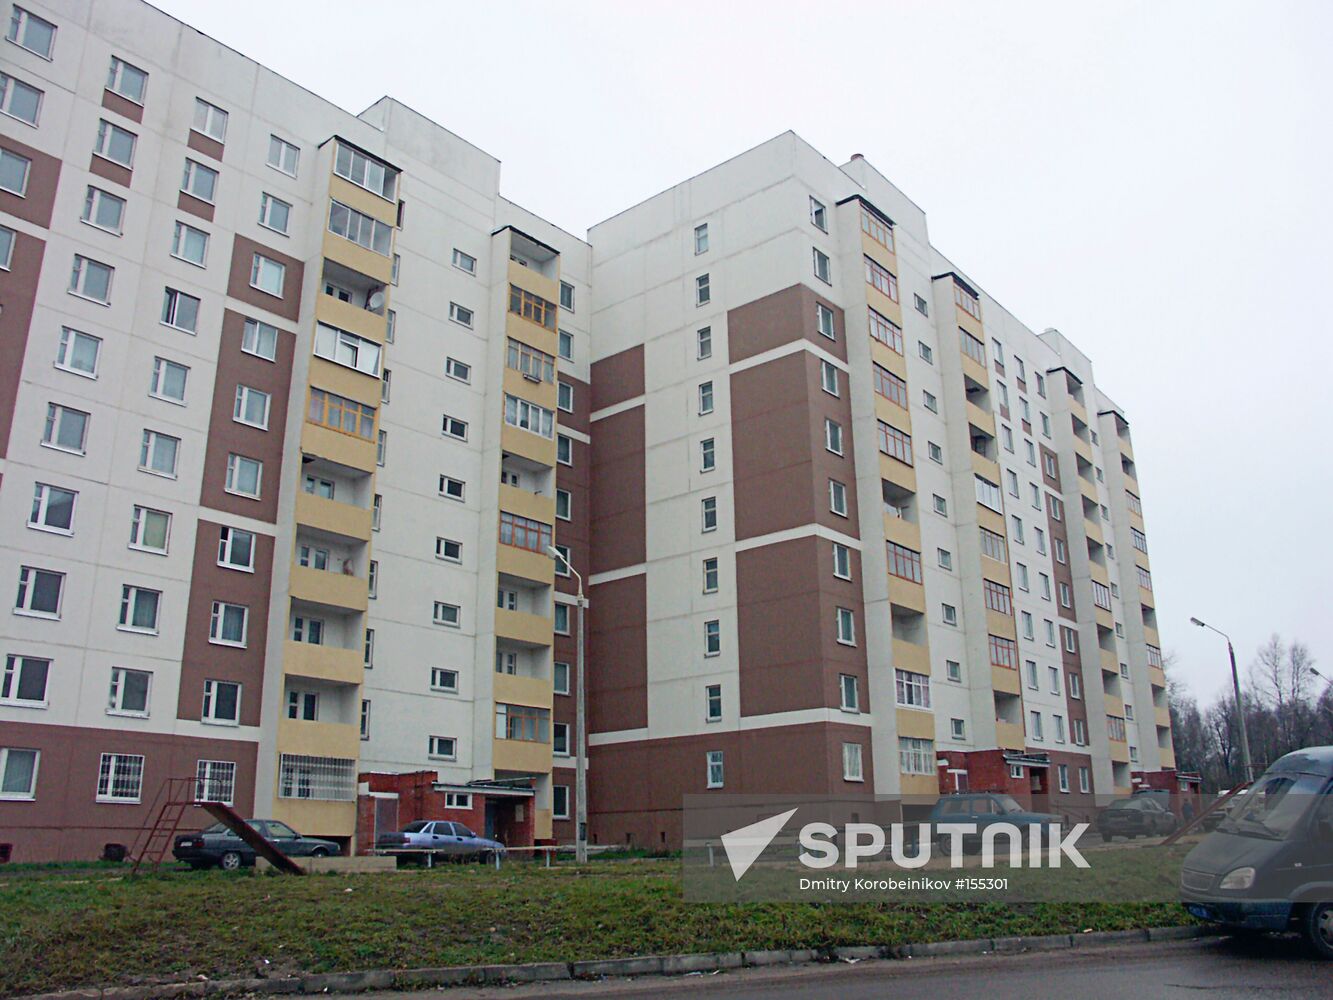 MOSCOW AREA NEW HOUSE